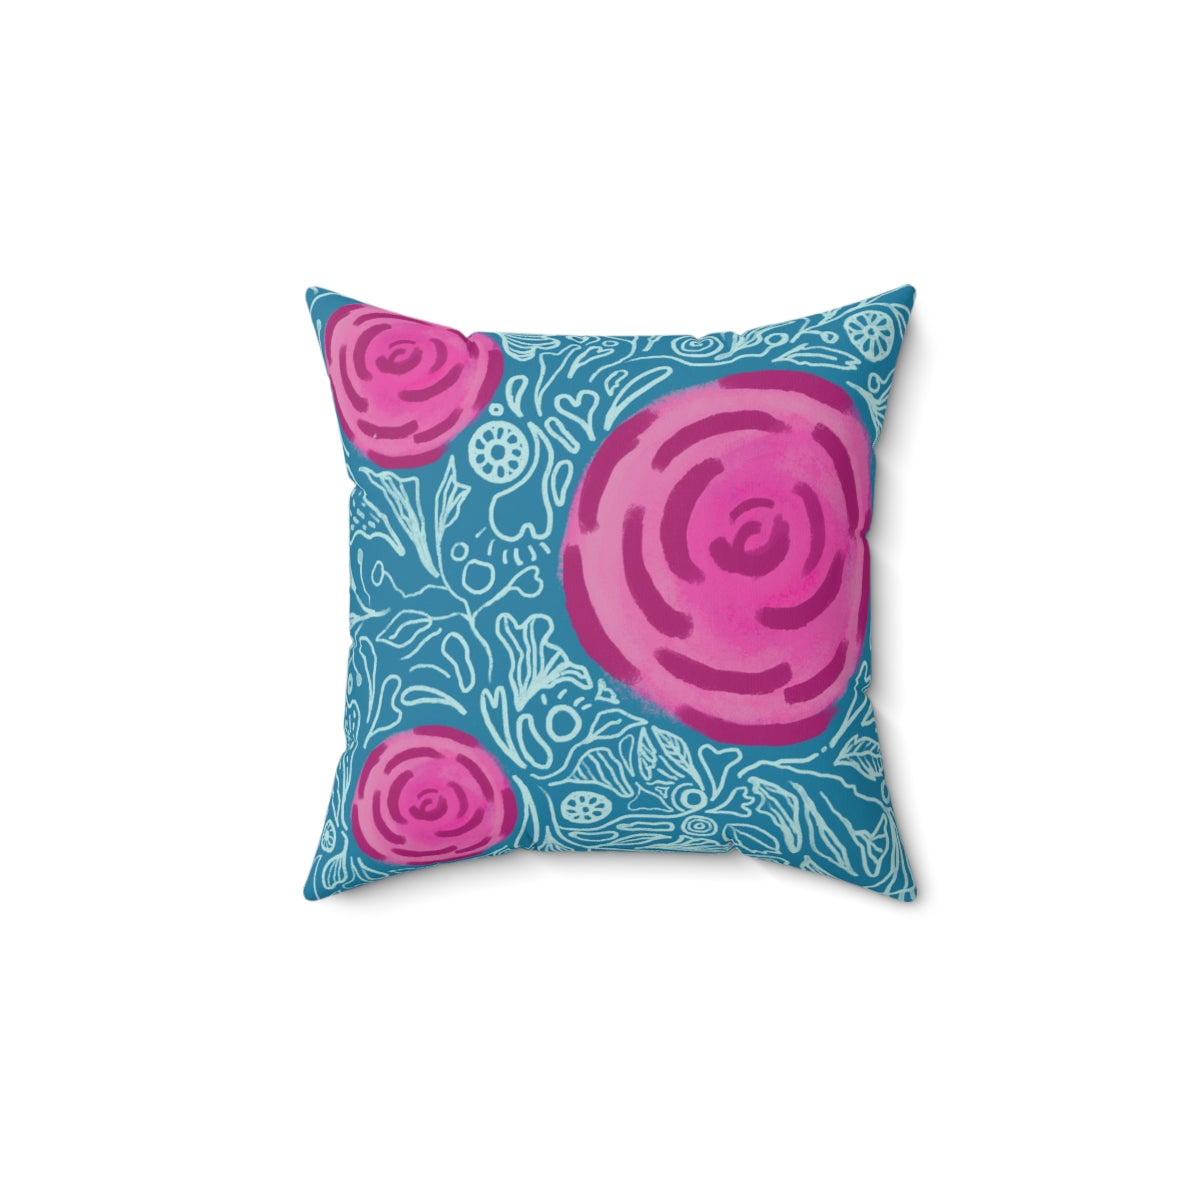 Pink Rose Cushion case (throw pillow cover) - faux fabric  - 14" × 14", 16" × 16", 18" × 18", 20" × 20"